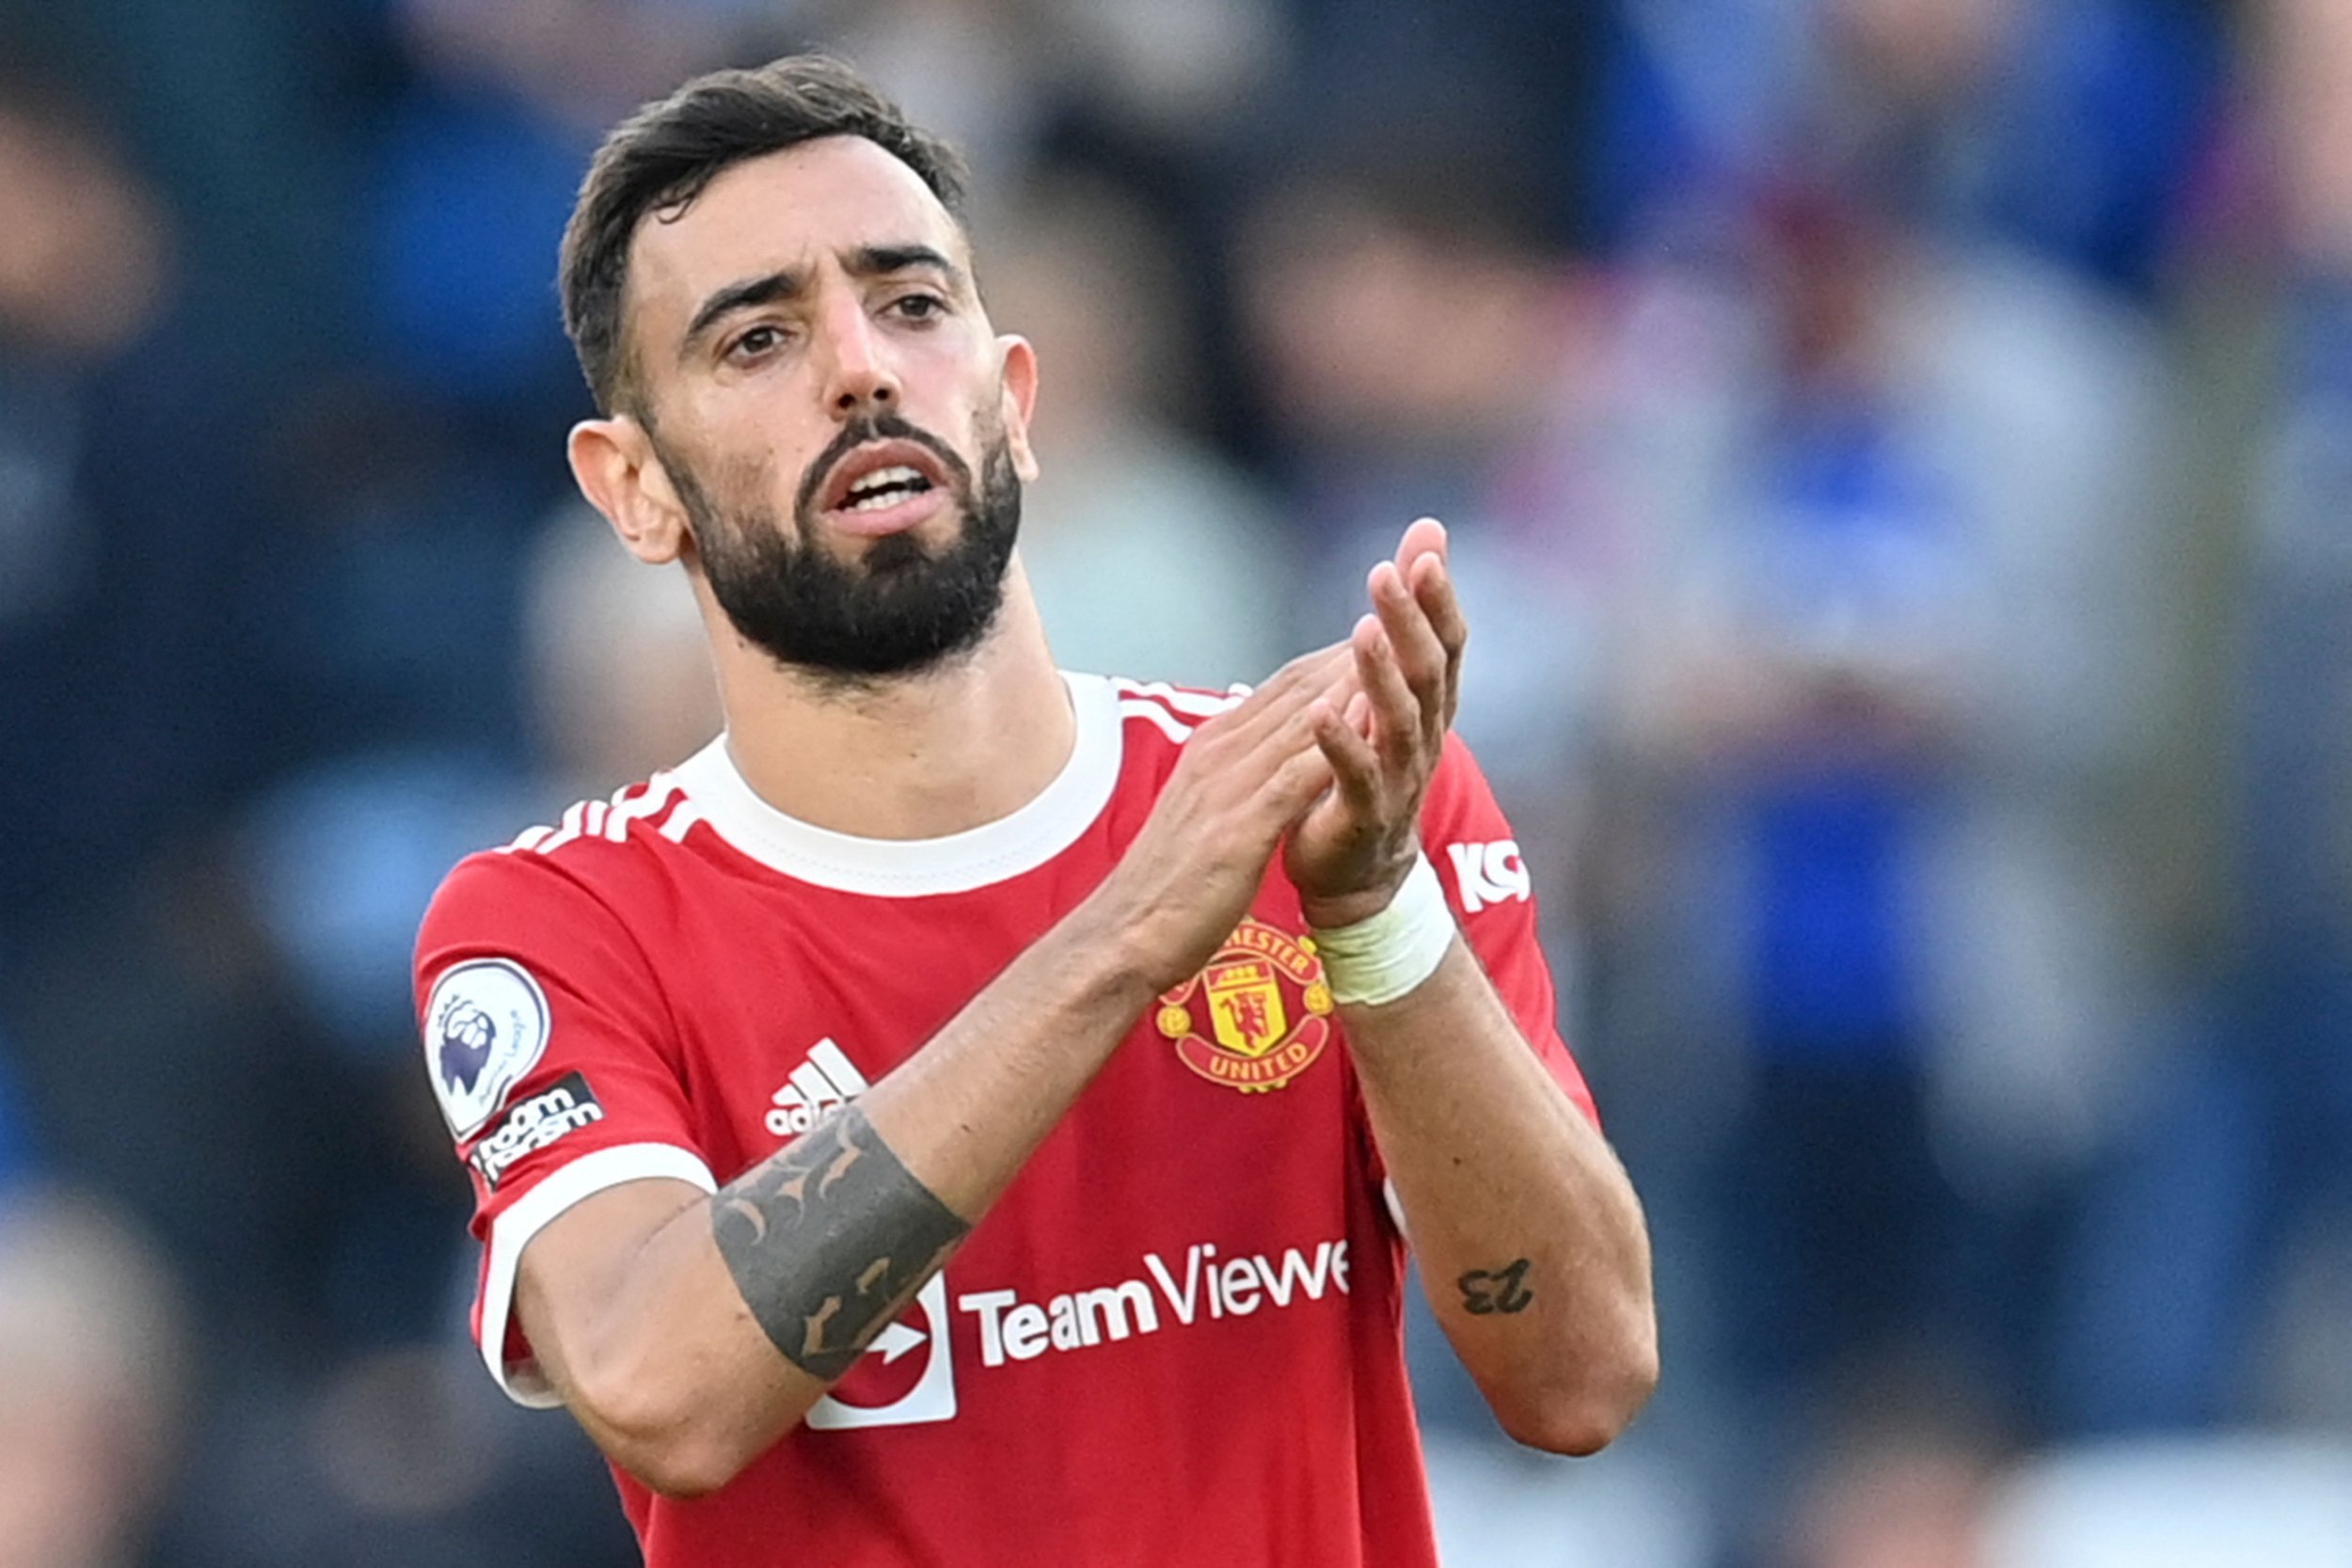 Ole Gunnar Solskjaer urged to drop Bruno Fernandes ahead of Manchester United’s clash with Liverpool